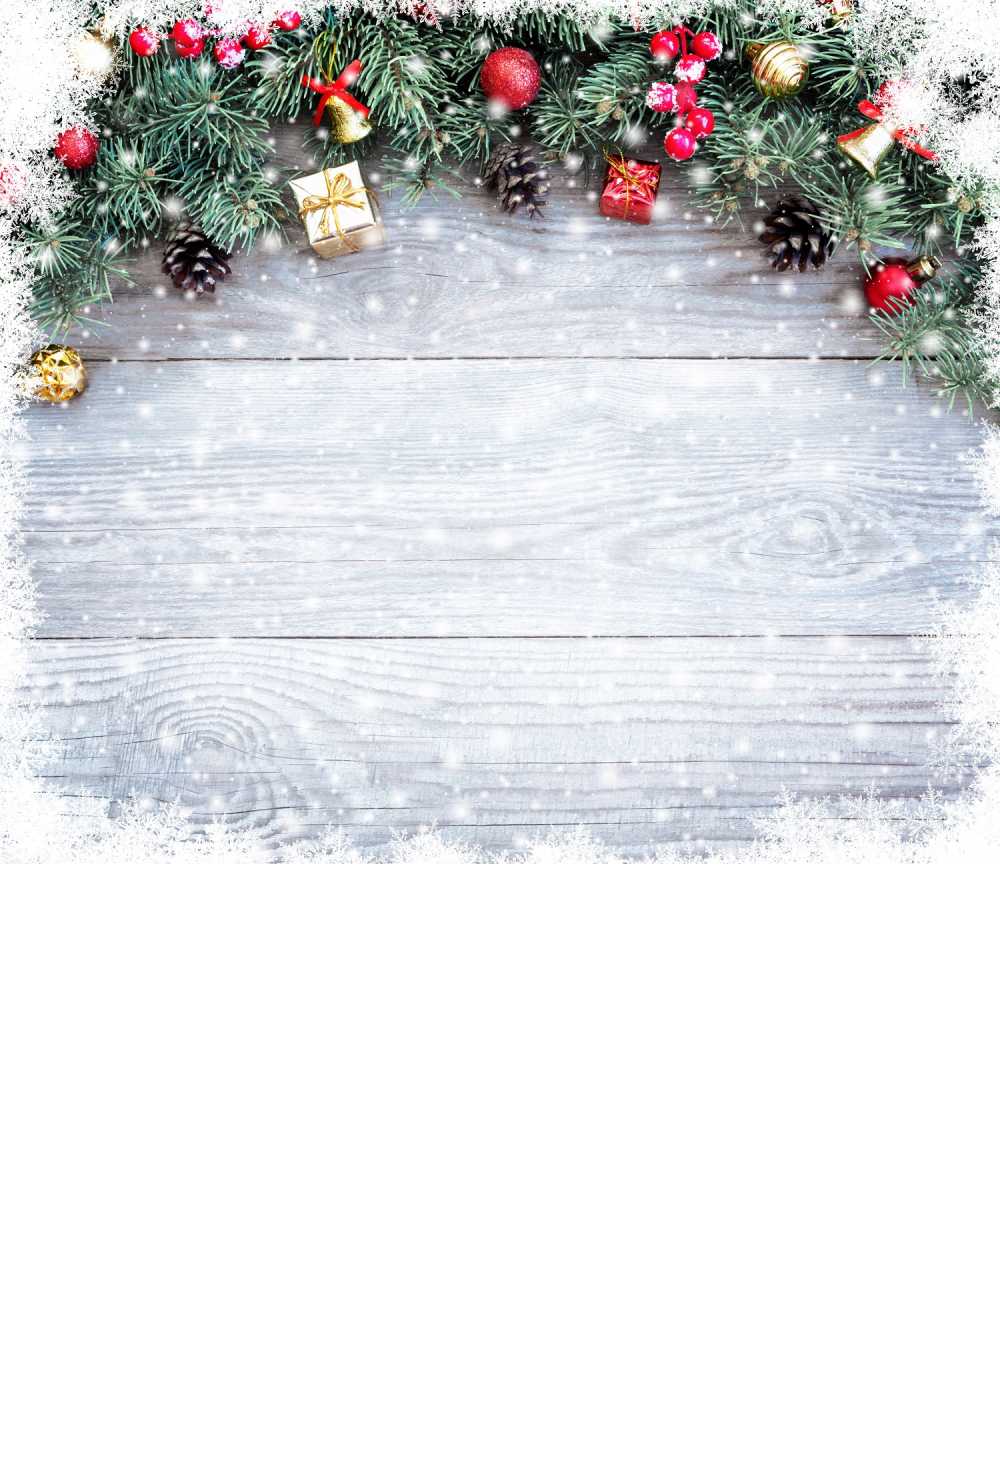 Christmas Wood Wall With Grand Fir Leaves Backdrop IBD-246875 size:1.5x2.2